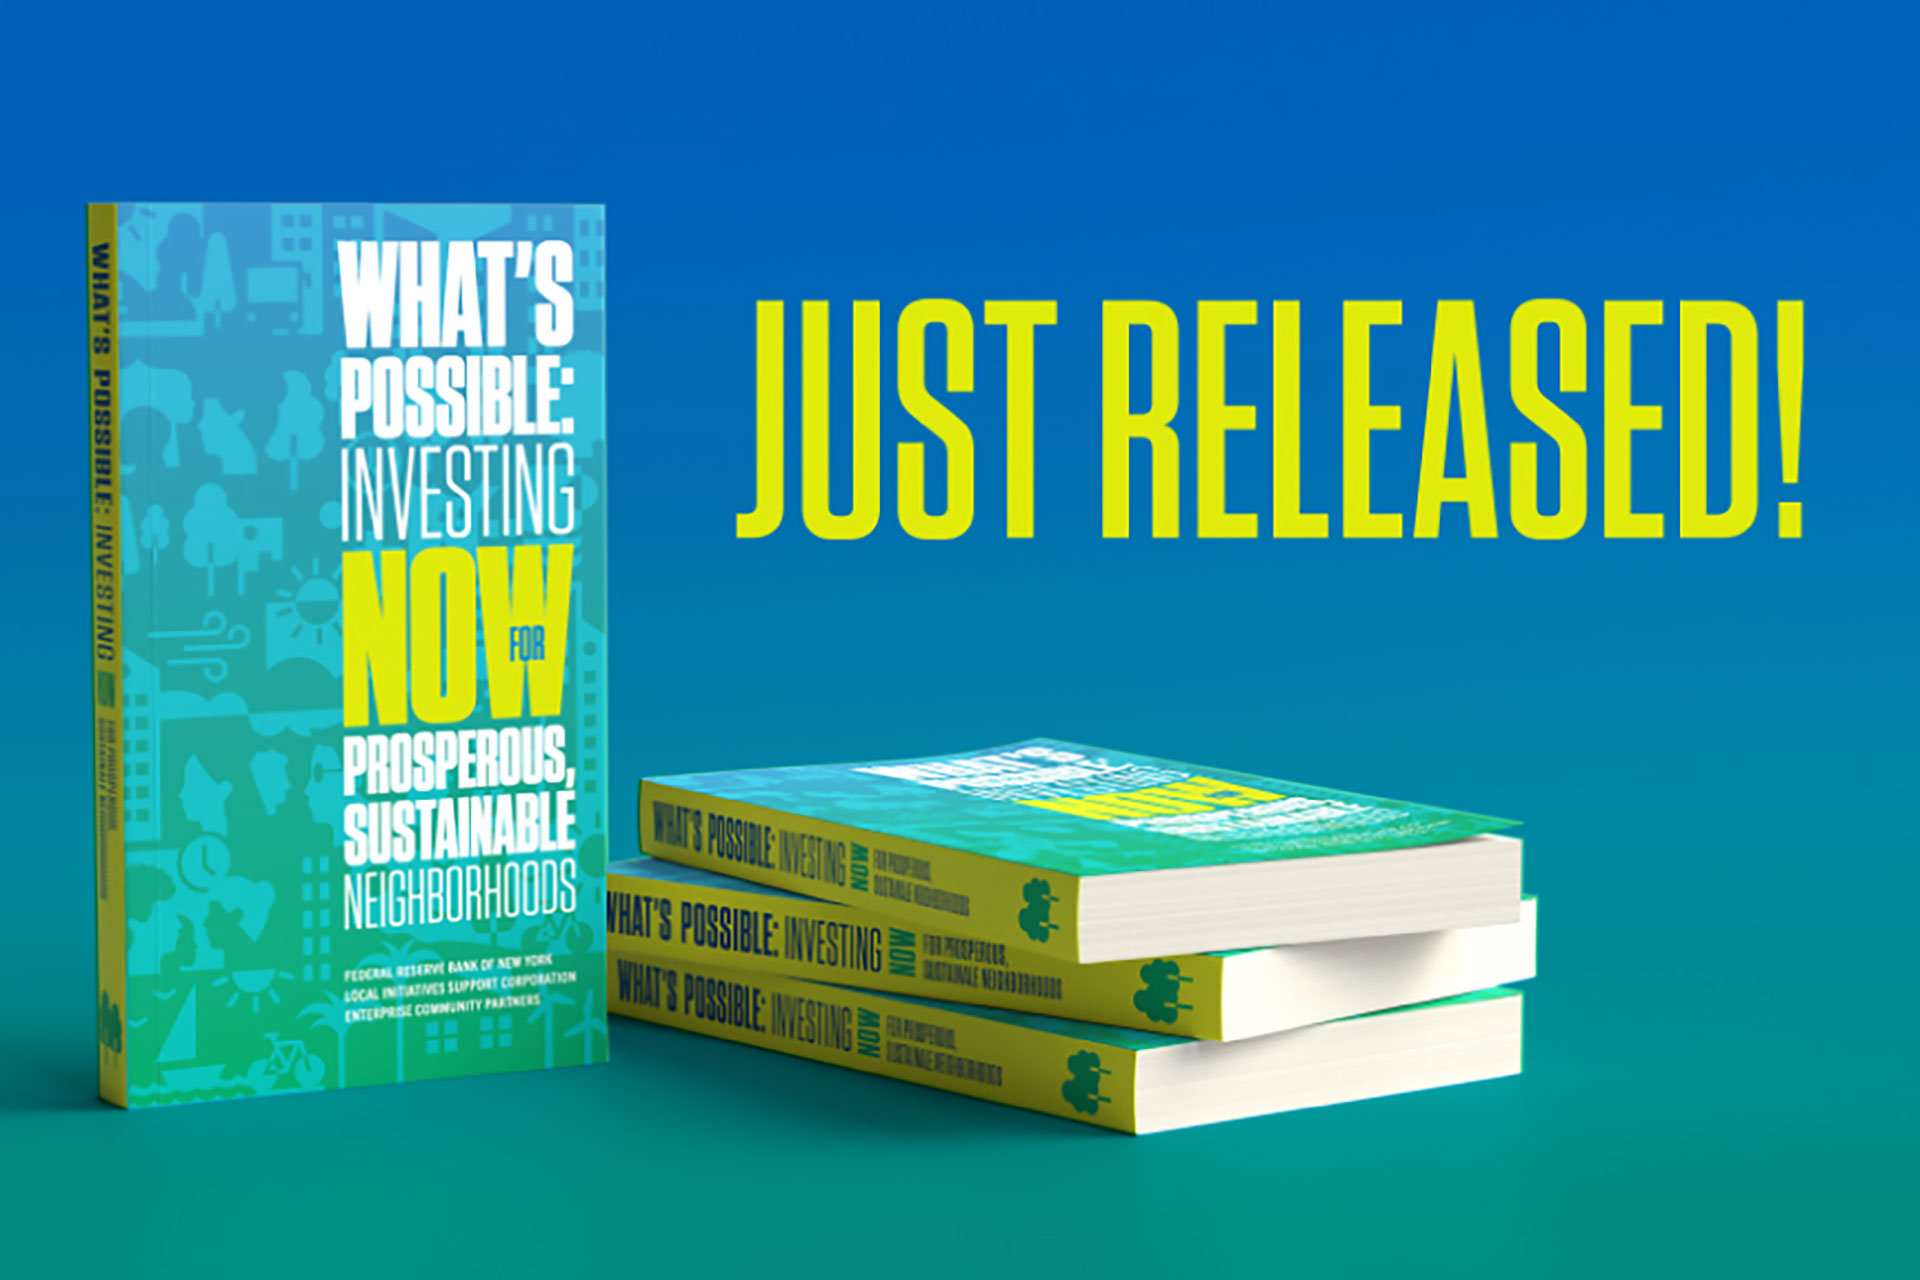 Book cover of the just released What's Possible: Investing Now for Prosperous, Sustainable, Neighborhoods